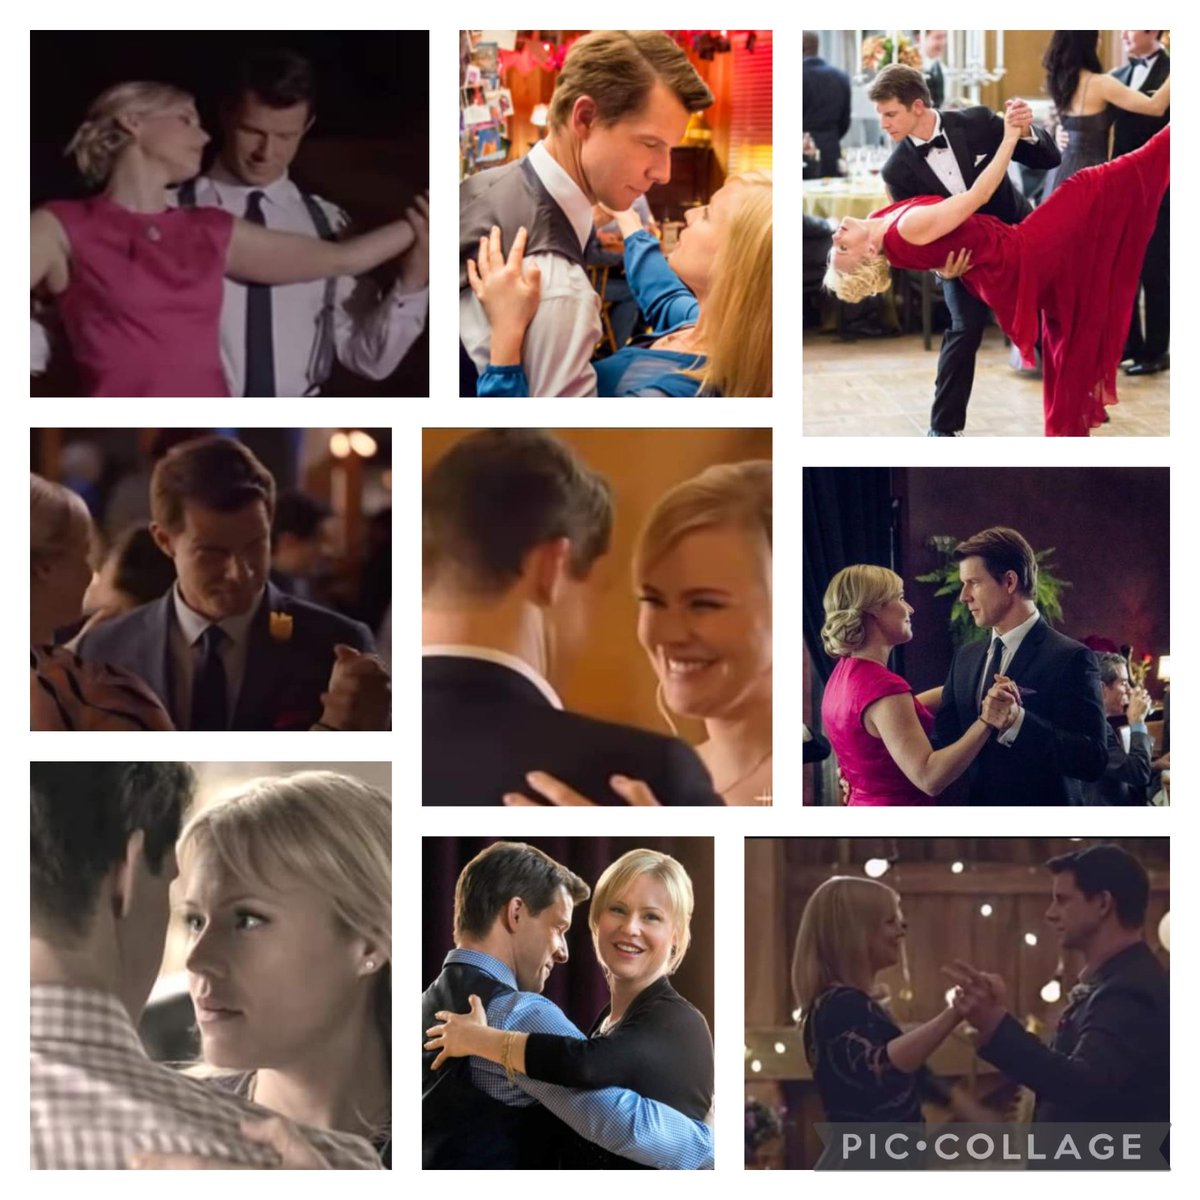 'I ONLY DANCE WITH YOU!' Already in the #Pilot Shane and Oliver danced and we felt the chemistry between them. The interrupted dance in #Masterpiece was the most emotional and also the saddest for me! @hallmarkmystery thank you for letting the dance go on! #POstables #SSD12